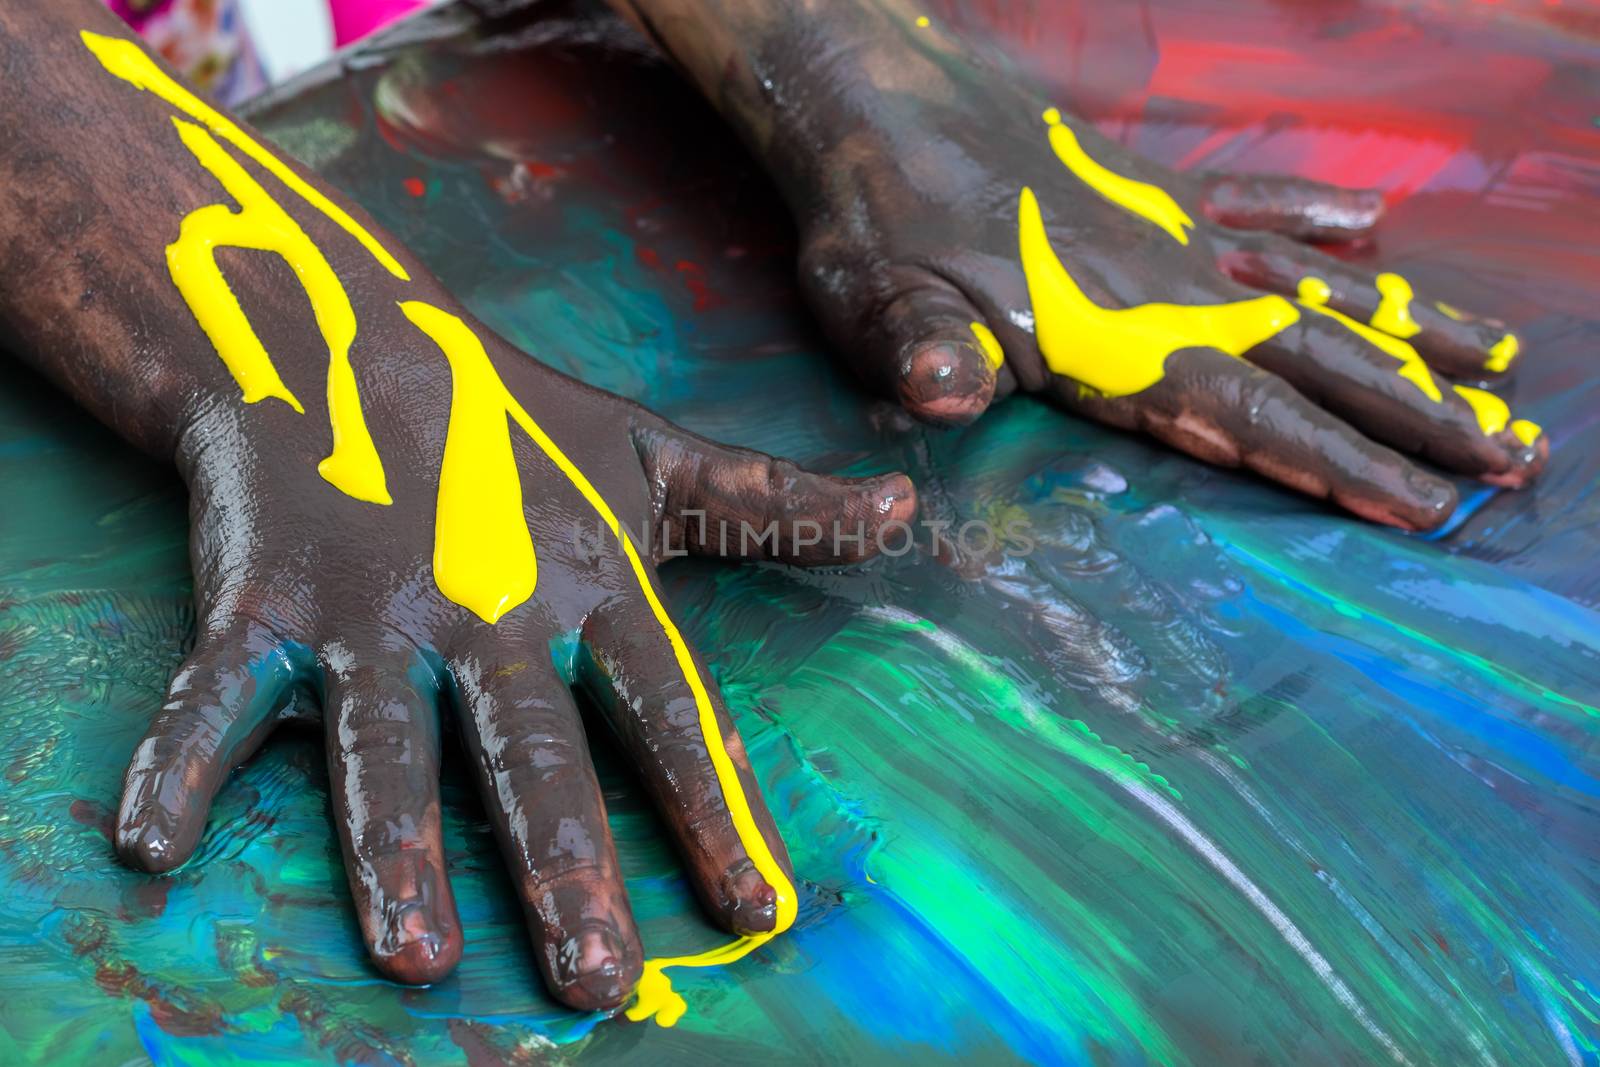 Kids painted hands. by karelnoppe